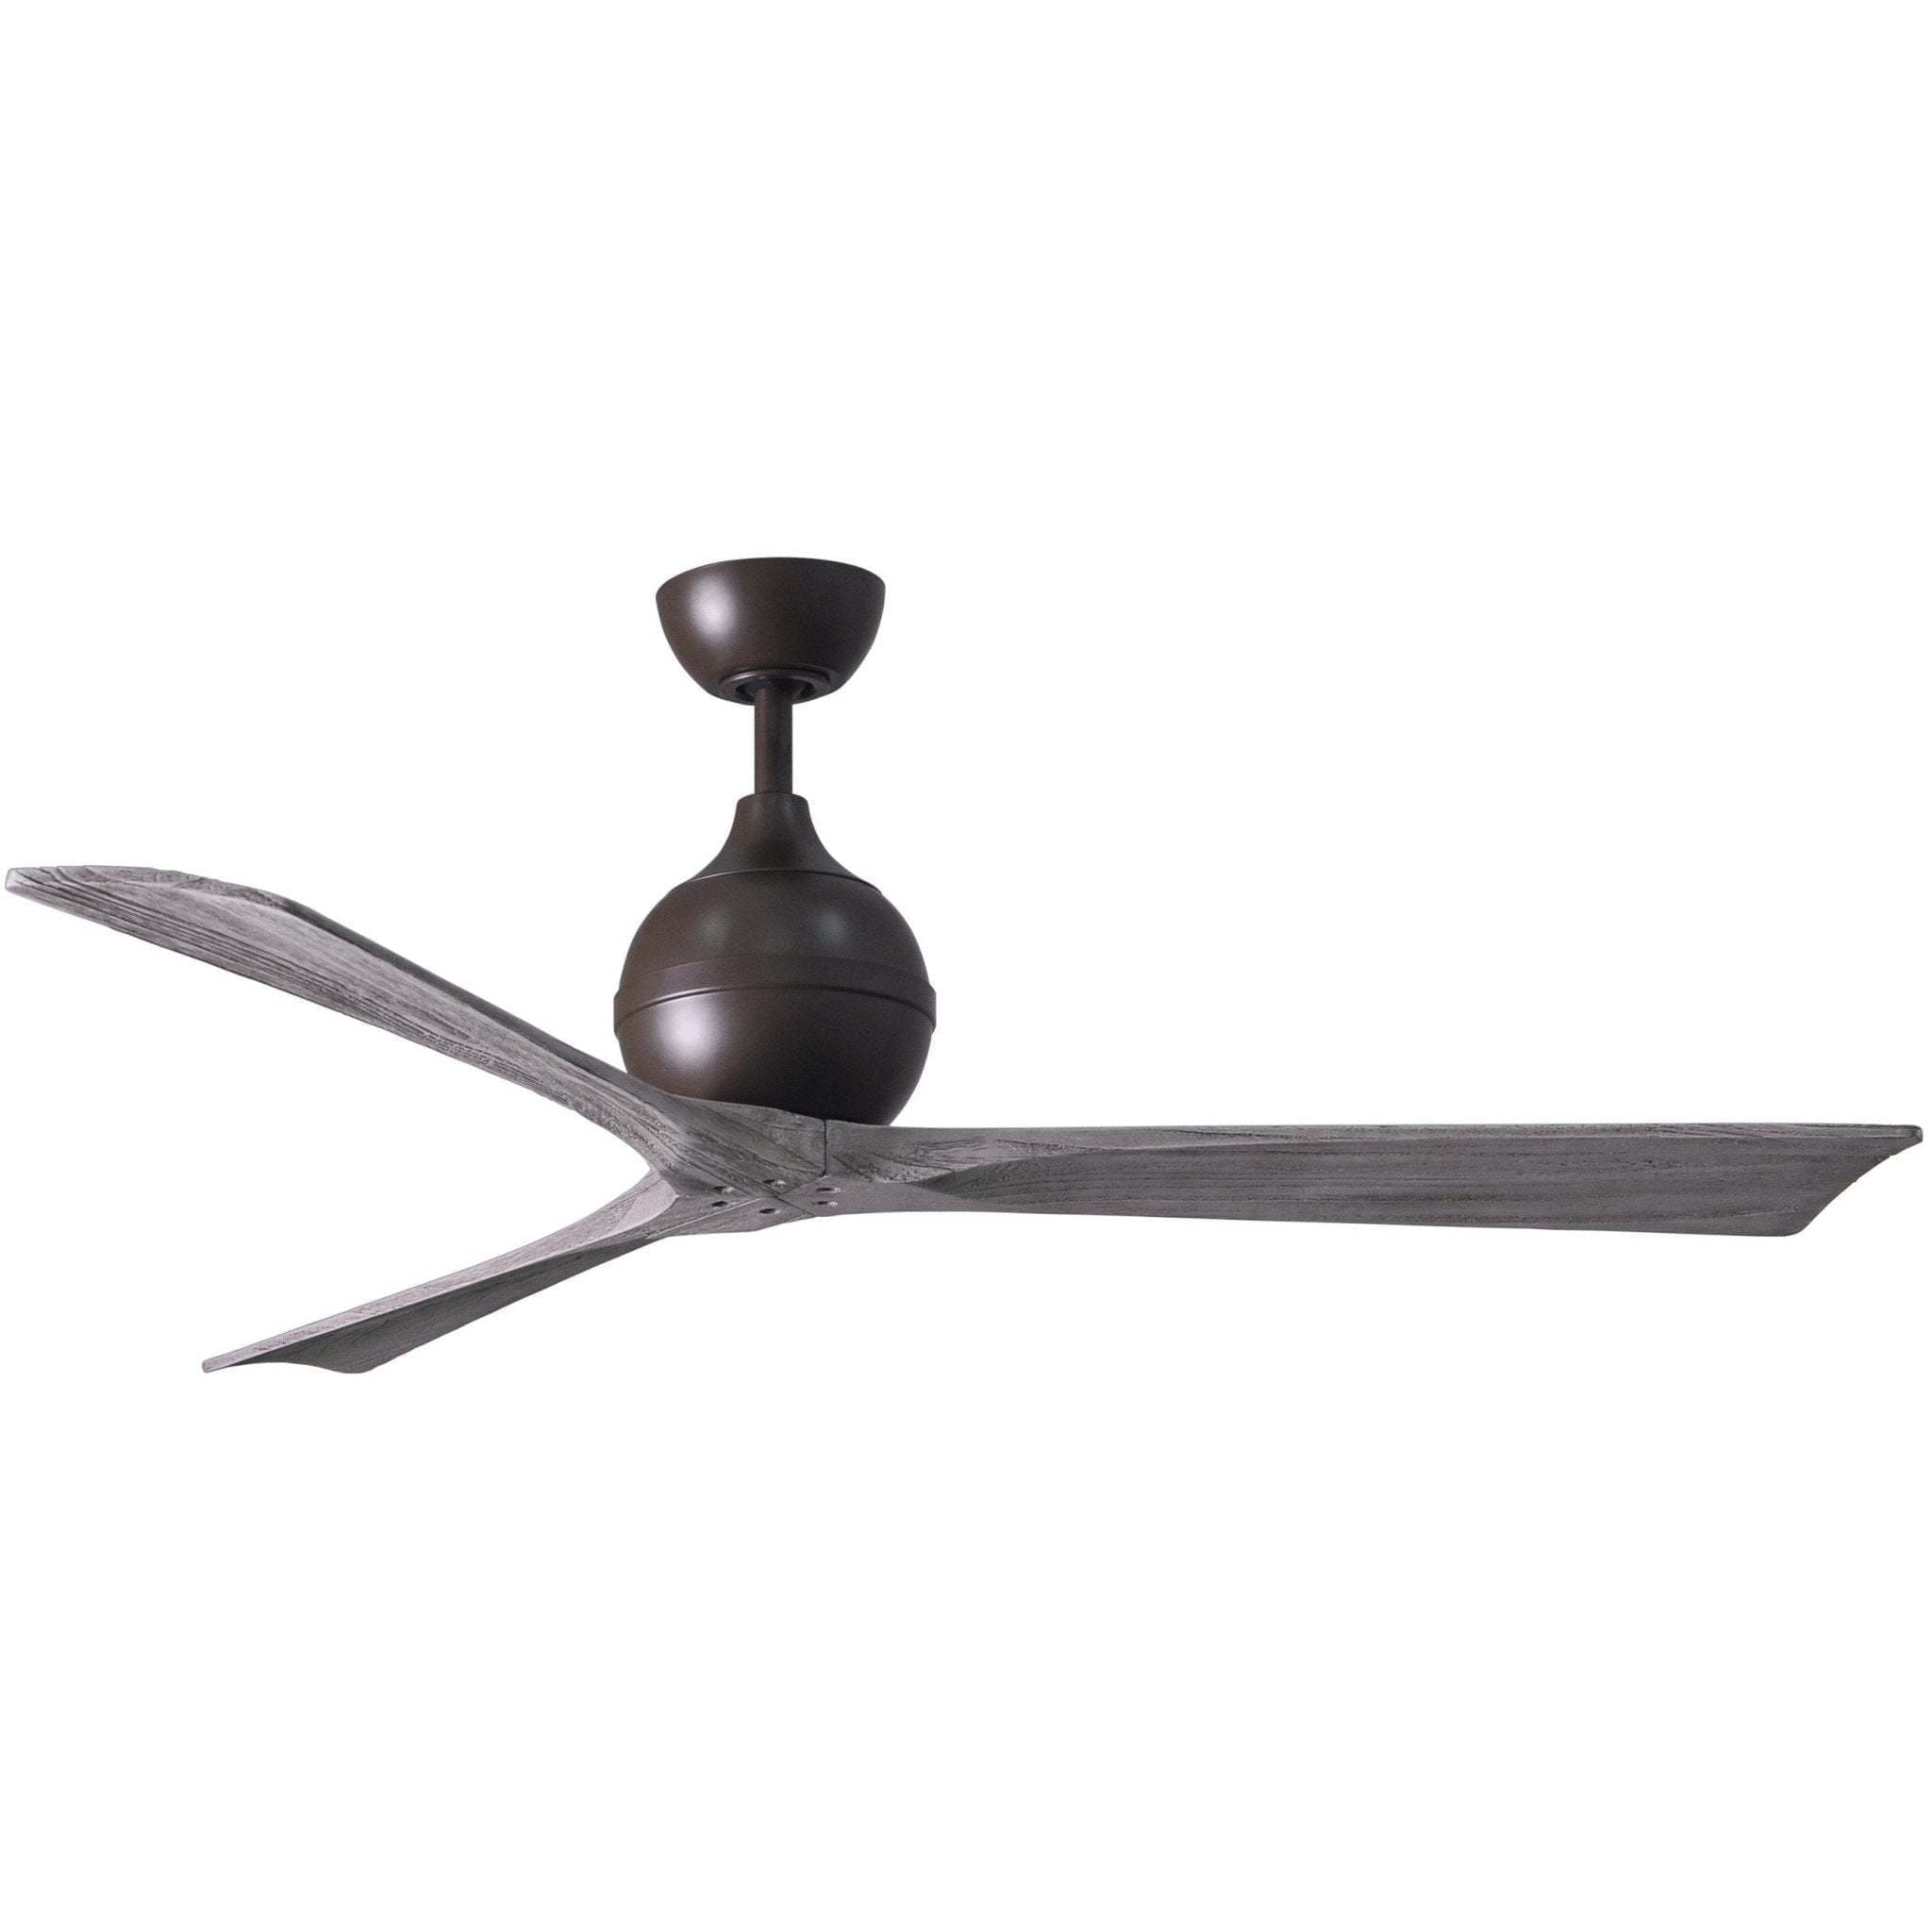 Shown in 60" in Textured Bronze and Barnwood Tone Blades